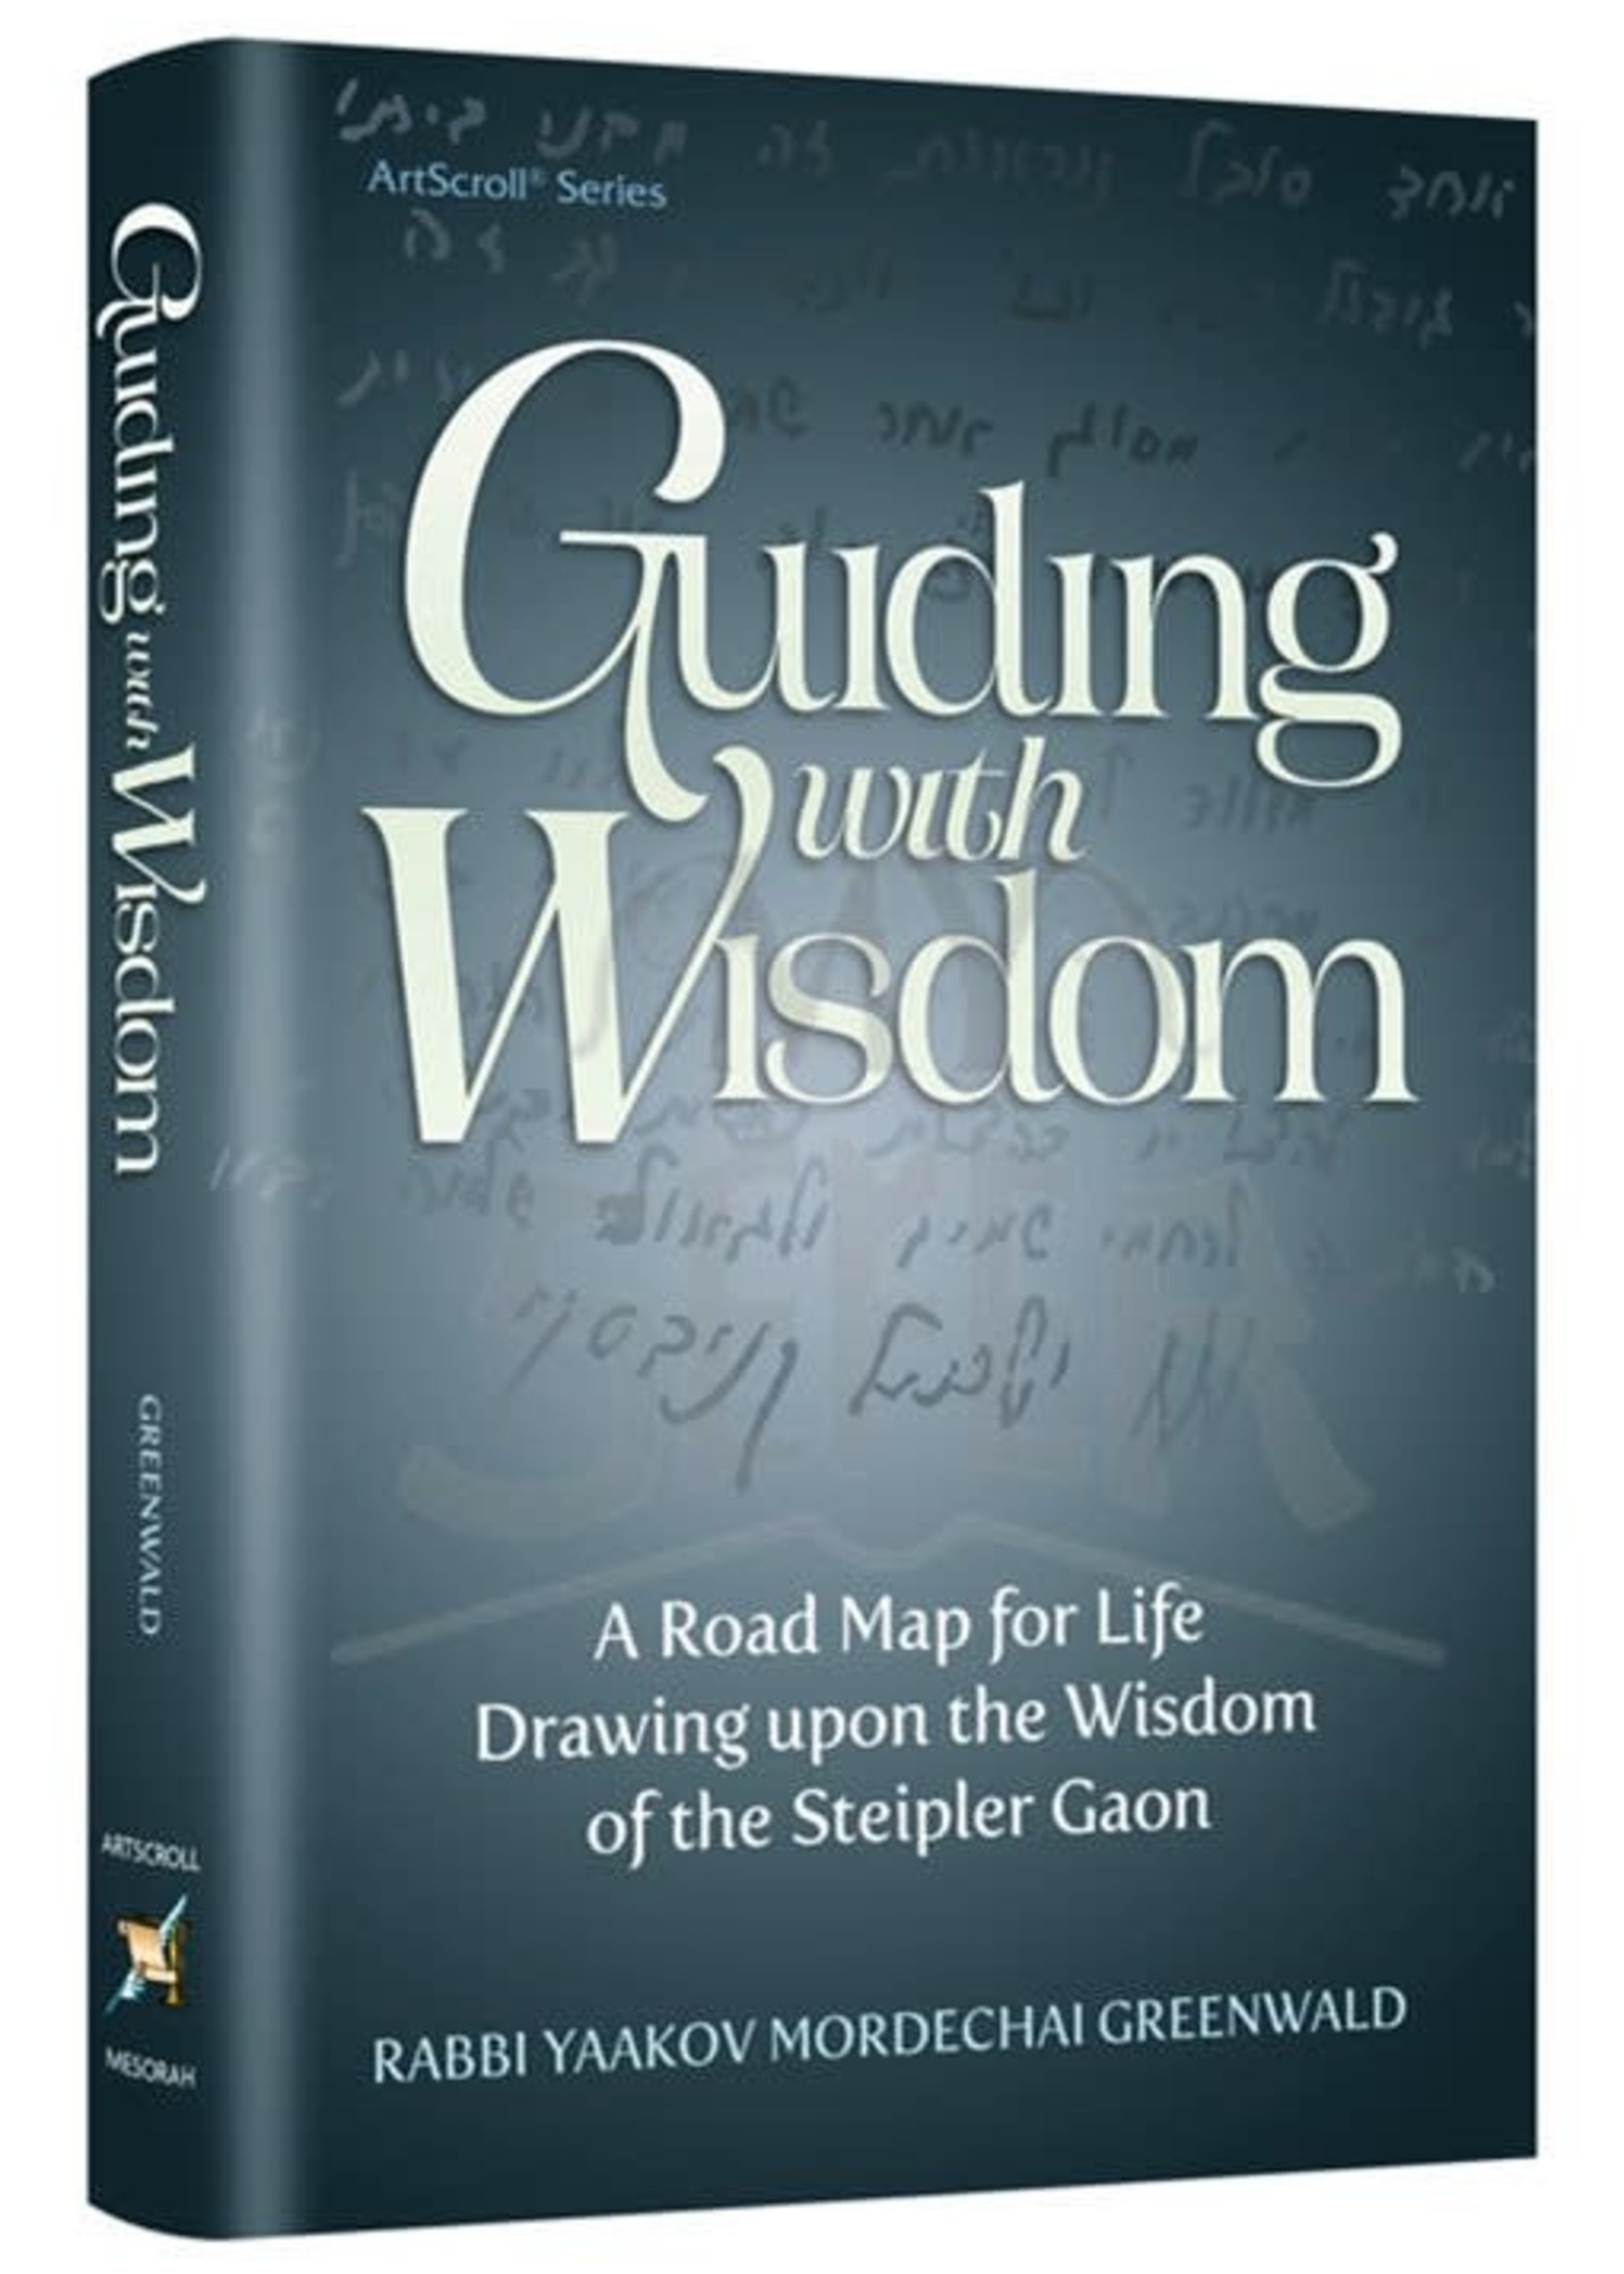 Rabbi Yaakov Mordechai Greenwald Guiding With Wisdom - A Road Map For Life Drawing Upon The Wisdom of the Steipler Gaon